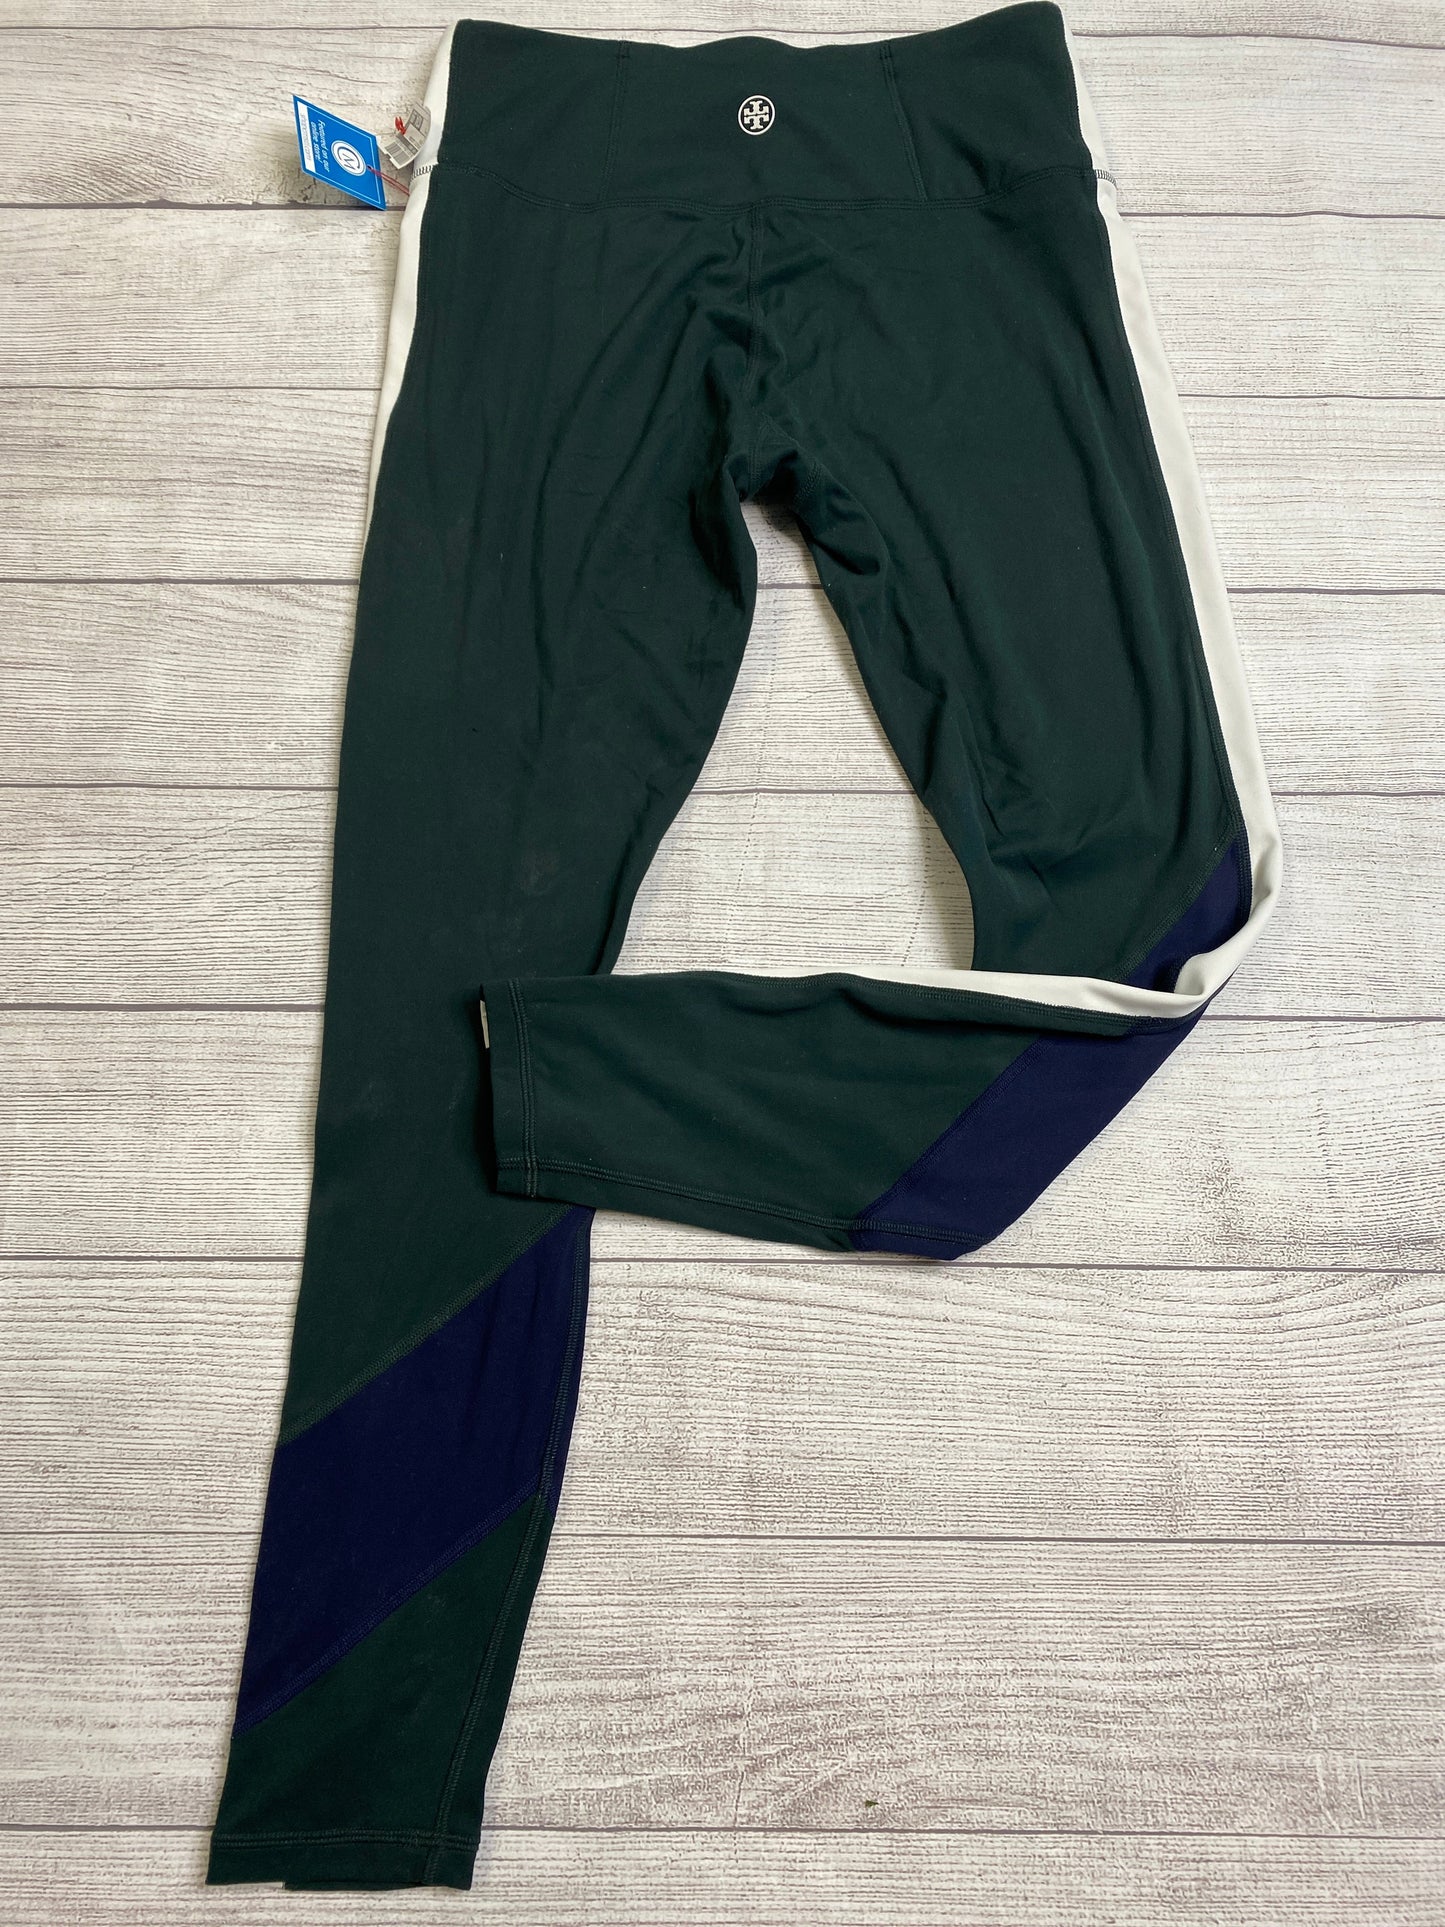 Athletic Leggings By Tory Burch  Size: L